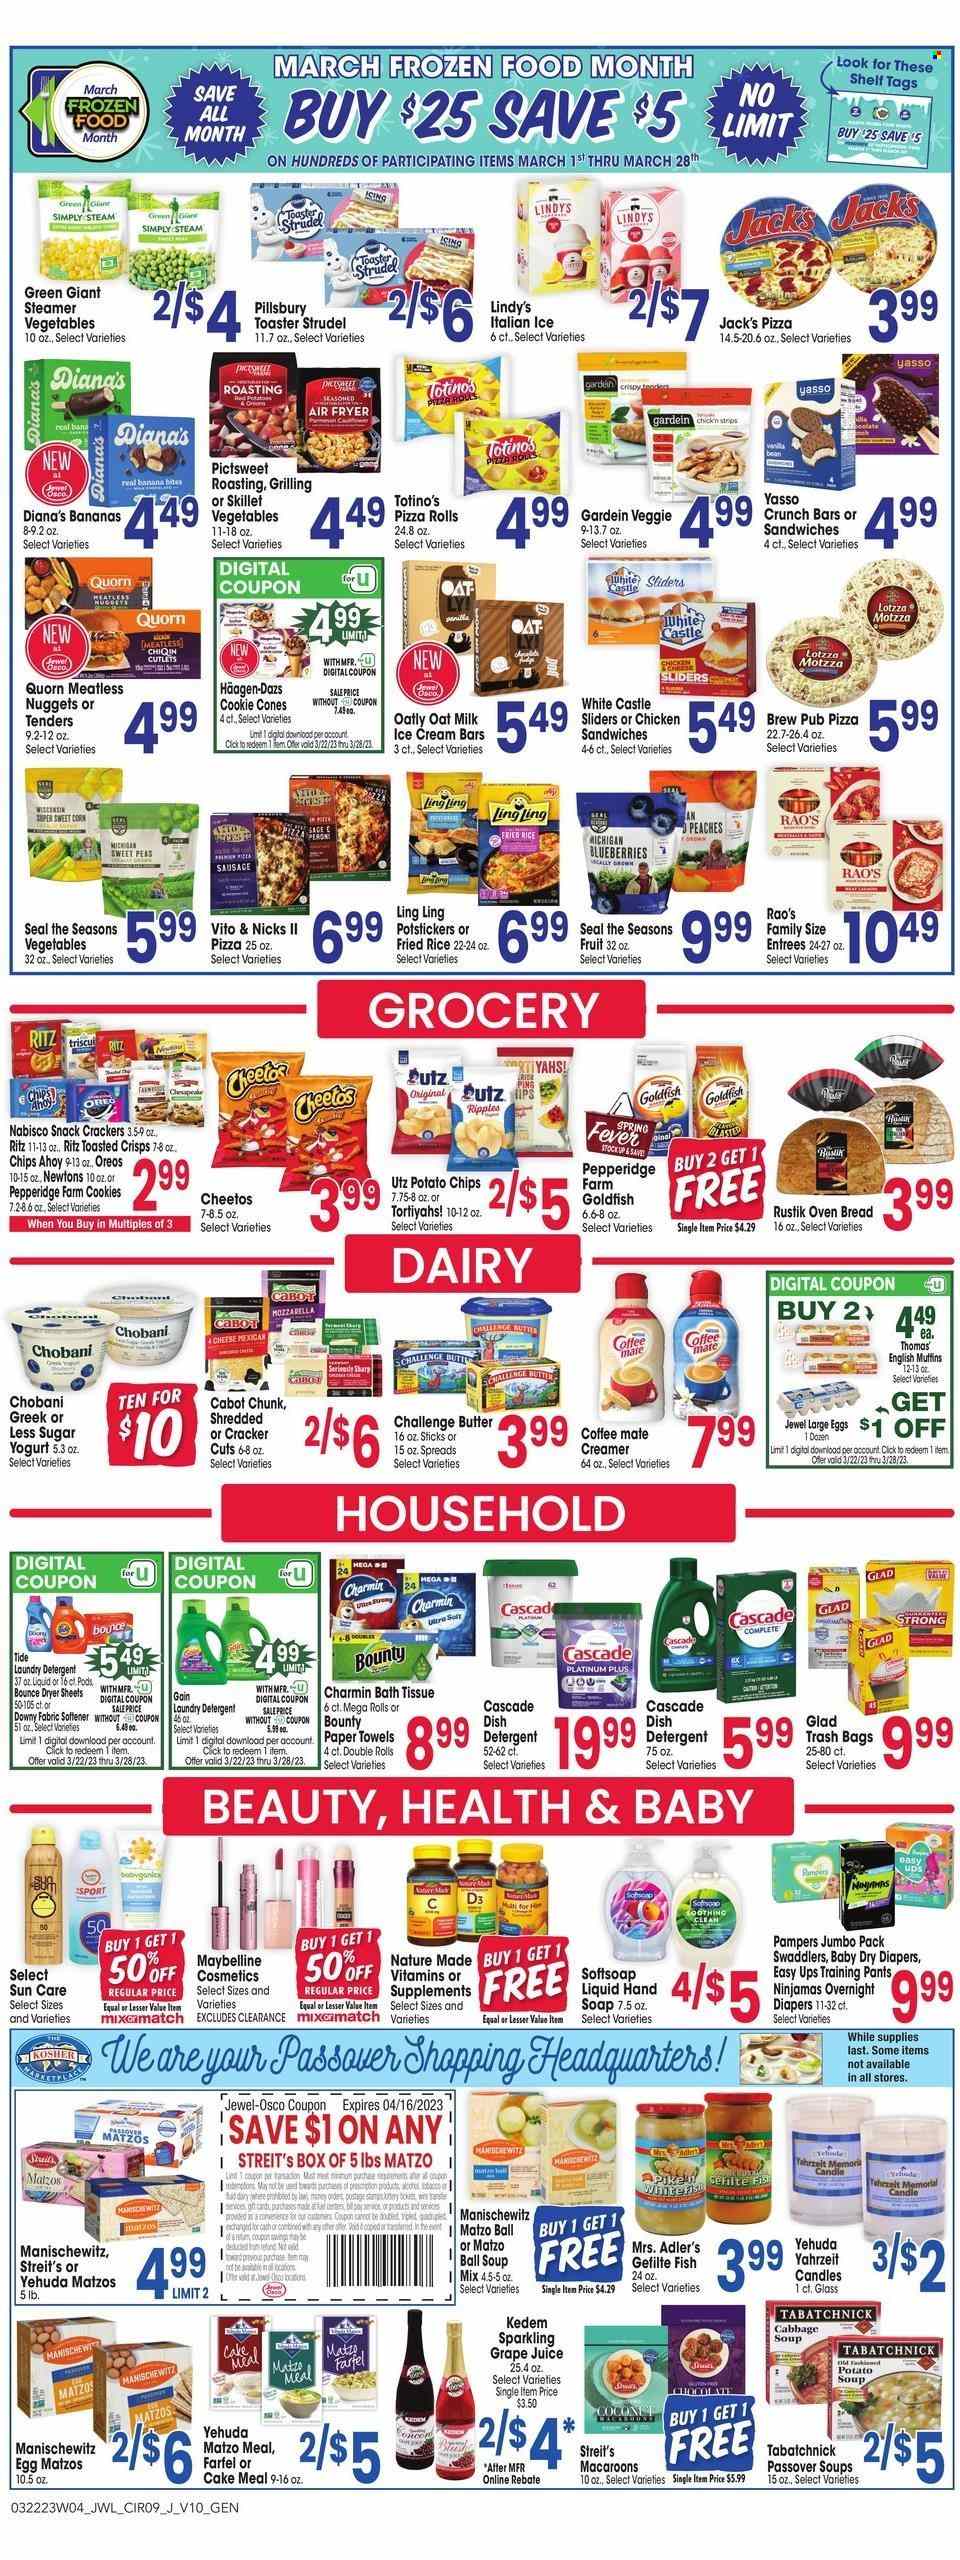 thumbnail - Jewel Osco Flyer - 03/22/2023 - 03/28/2023 - Sales products - bread, english muffins, cake, pizza rolls, strudel, cabbage, corn, peas, sweet corn, blueberries, fish, pizza, sandwich, soup mix, soup, nuggets, Pillsbury, sausage, yoghurt, Chobani, Coffee-Mate, milk, oat milk, large eggs, creamer, ice cream, ice cream bars, Häagen-Dazs, strips, cookies, snack, Bounty, crackers, RITZ, potato chips, Cheetos, Goldfish, matzo meal, juice, Kedem, Castle, Pampers, pants, nappies, baby pants, bath tissue, kitchen towels, paper towels, Charmin, detergent, Gain, Cascade, Tide, laundry detergent, Bounce, dryer sheets, Downy Laundry, dishwasher cleaner, Softsoap, hand soap, soap, trash bags, Maybelline, candle, air fryer, Nature Made, vitamin D3, peaches. Page 9.